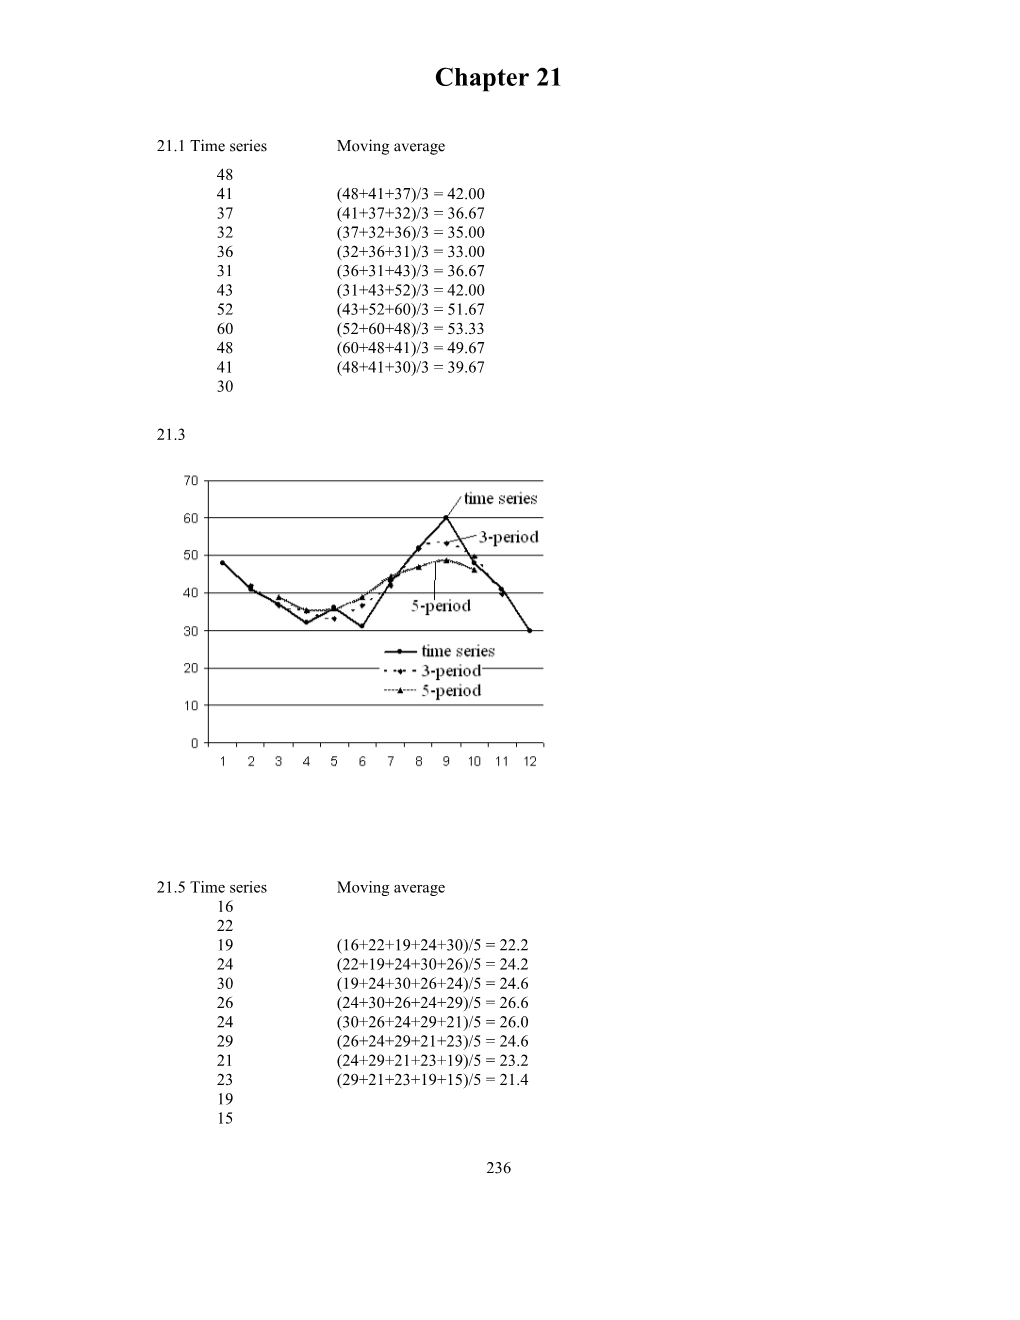 Chapter 20 Time Series Analysis and Forecasting